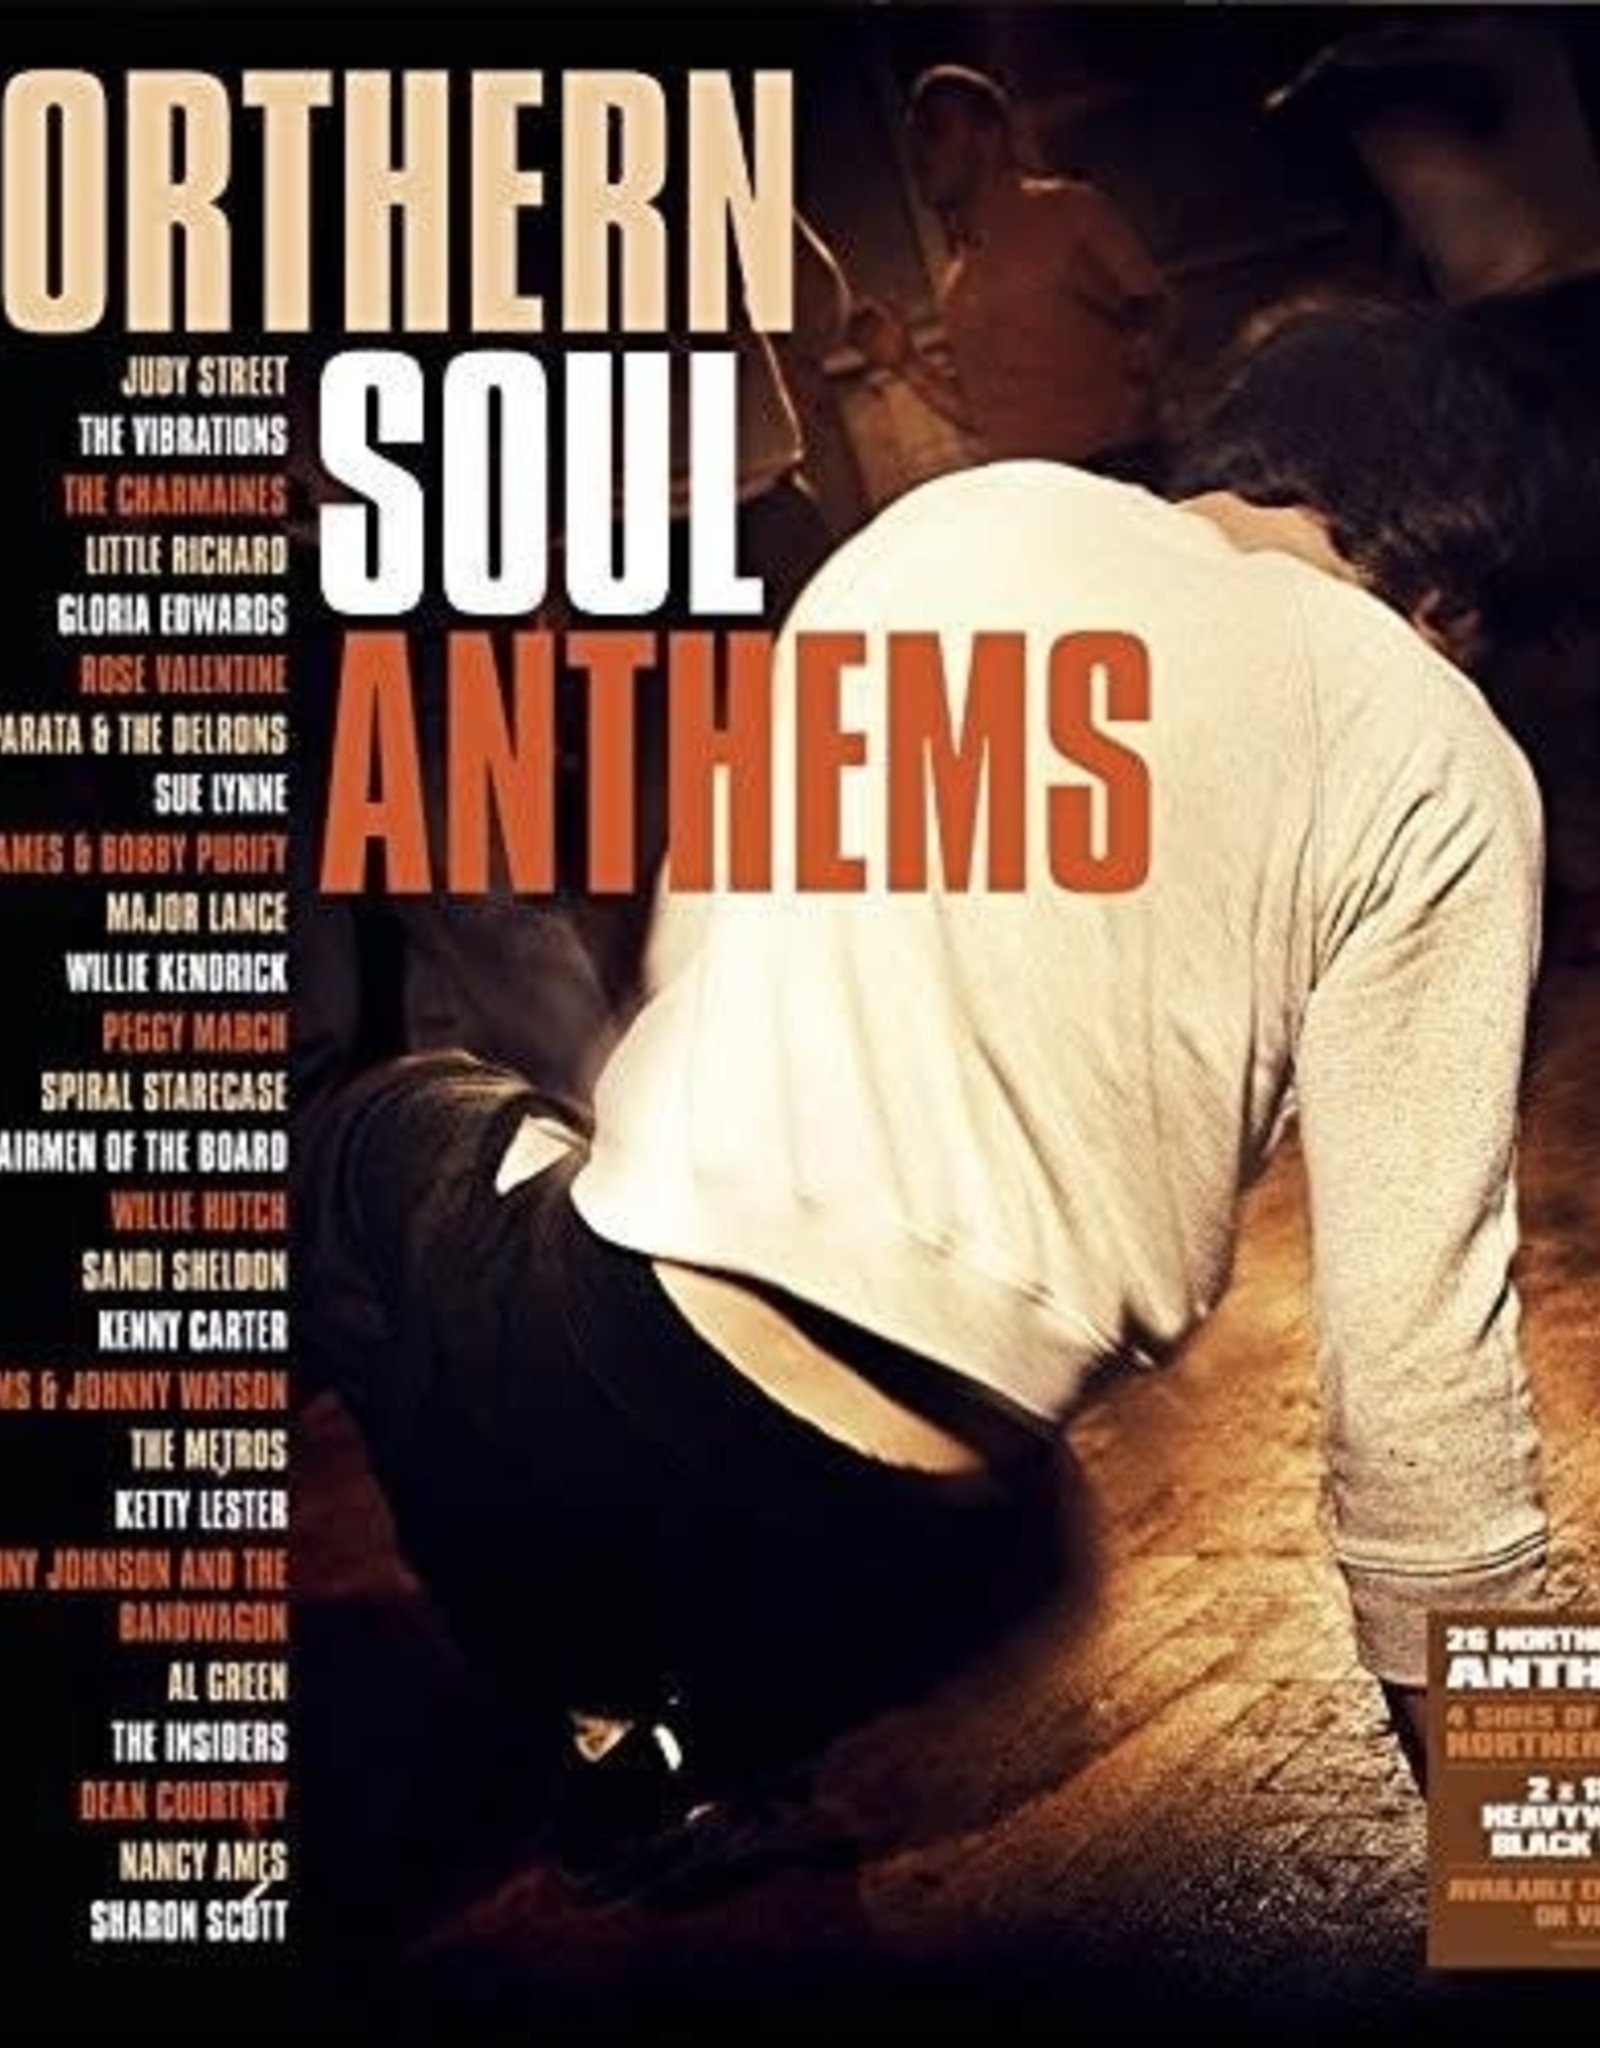 Northern Soul Anthems 2LP Compilation